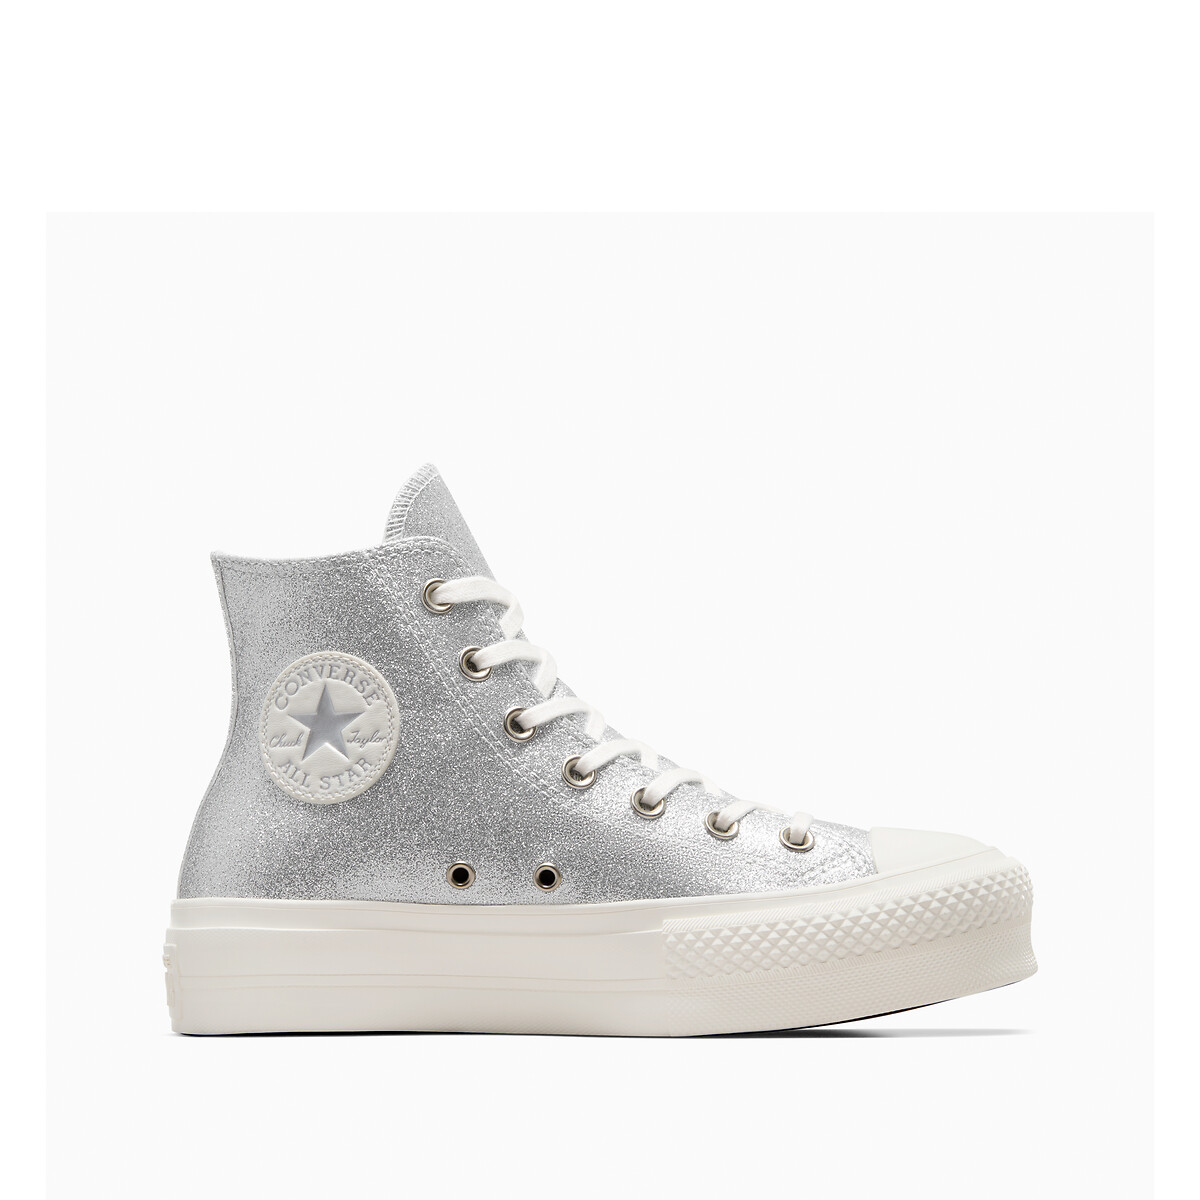 Image of All Star Lift Hi Sparkle Party High Top Trainers